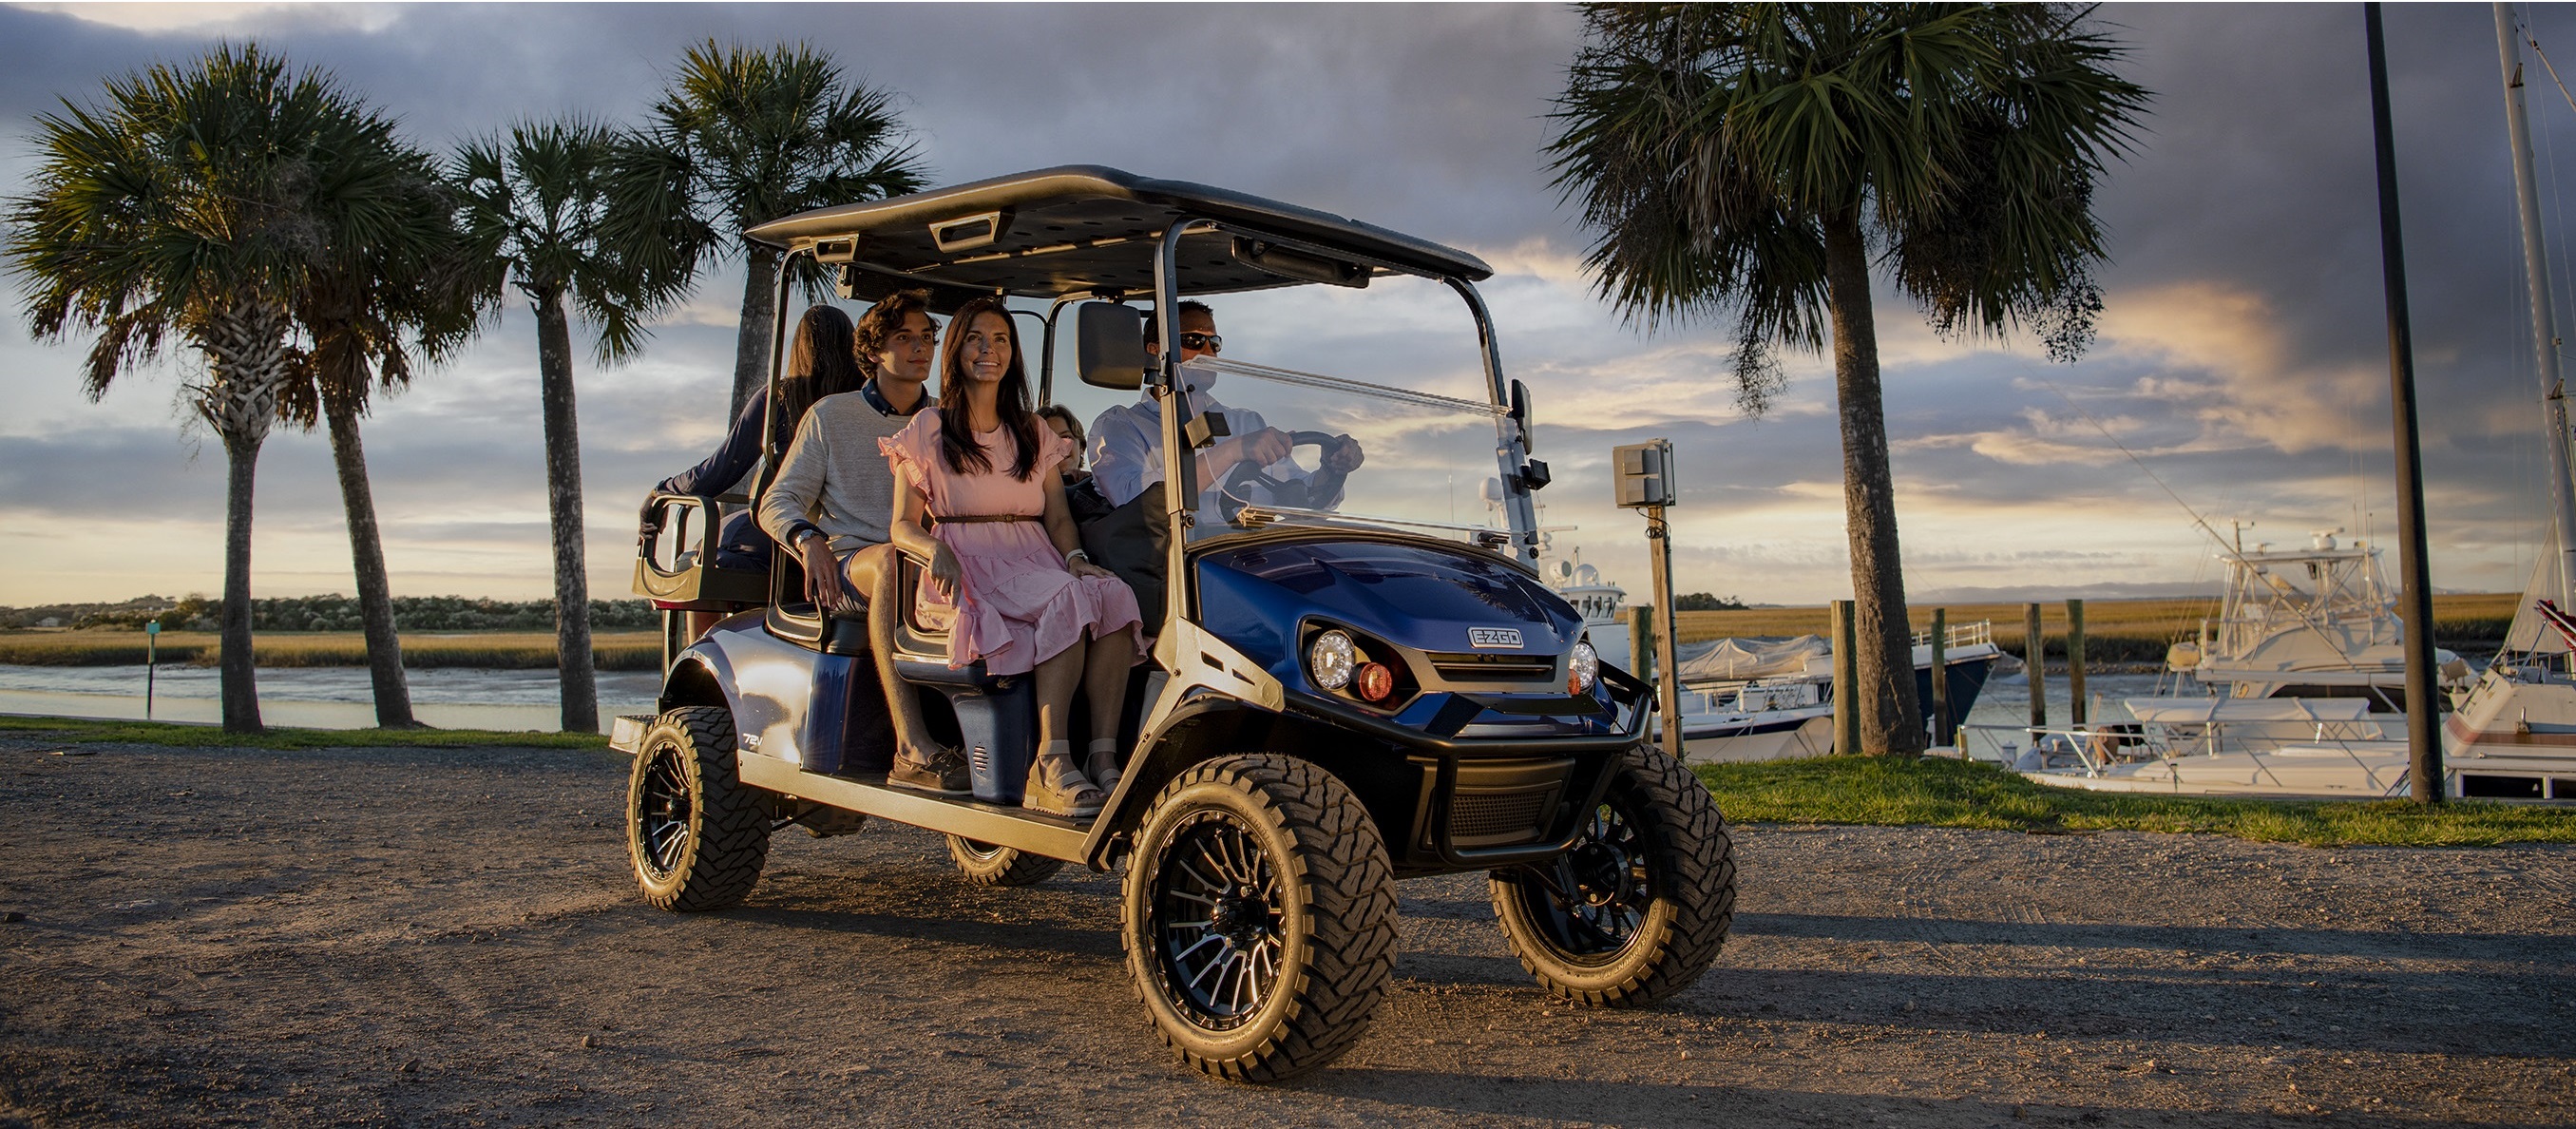 2020 EZGO Express S4 for sale in Golf Carts Unlimited, LLC, Slippery Rock, Pennsylvania